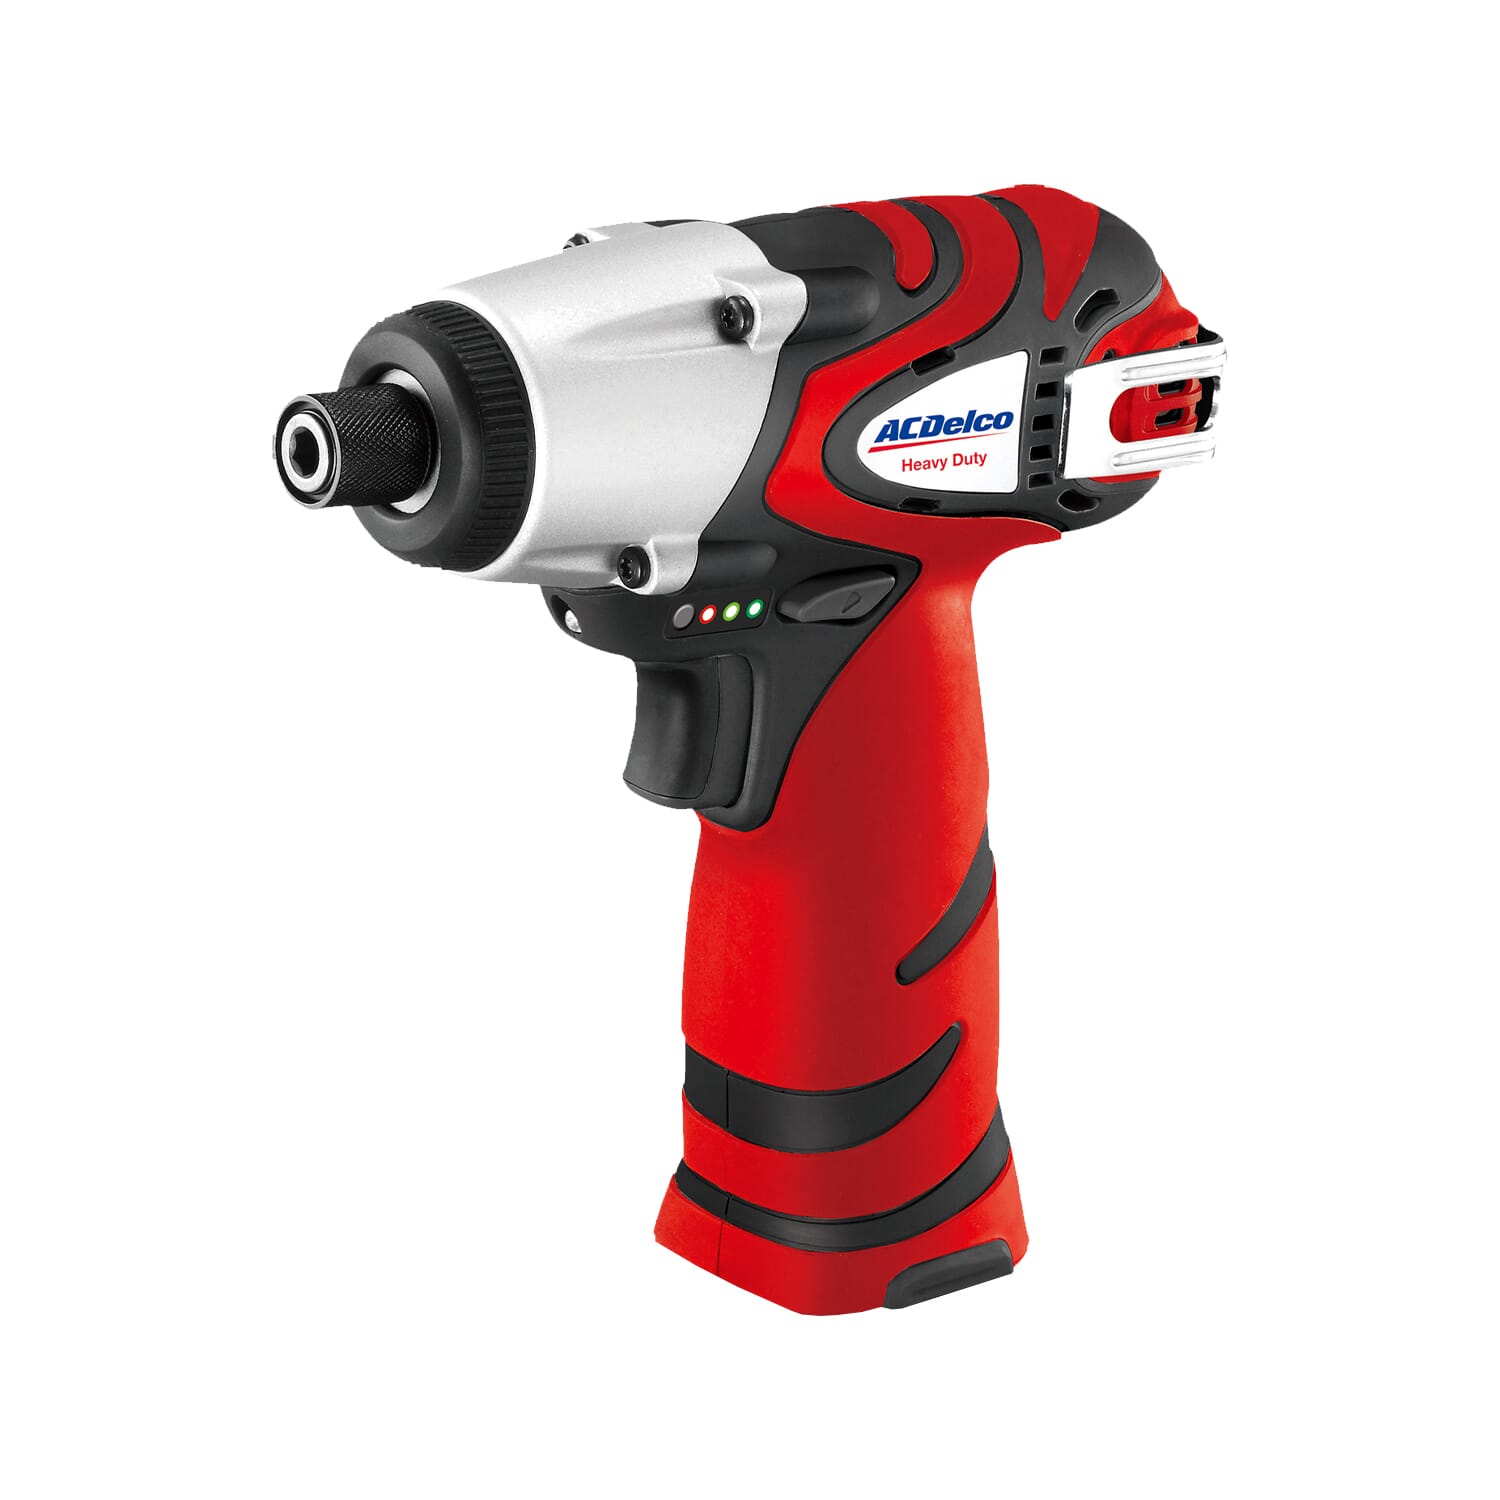 ARI1265T Lithium-Ion 12V Impact Driver Power Tool - Tool Only